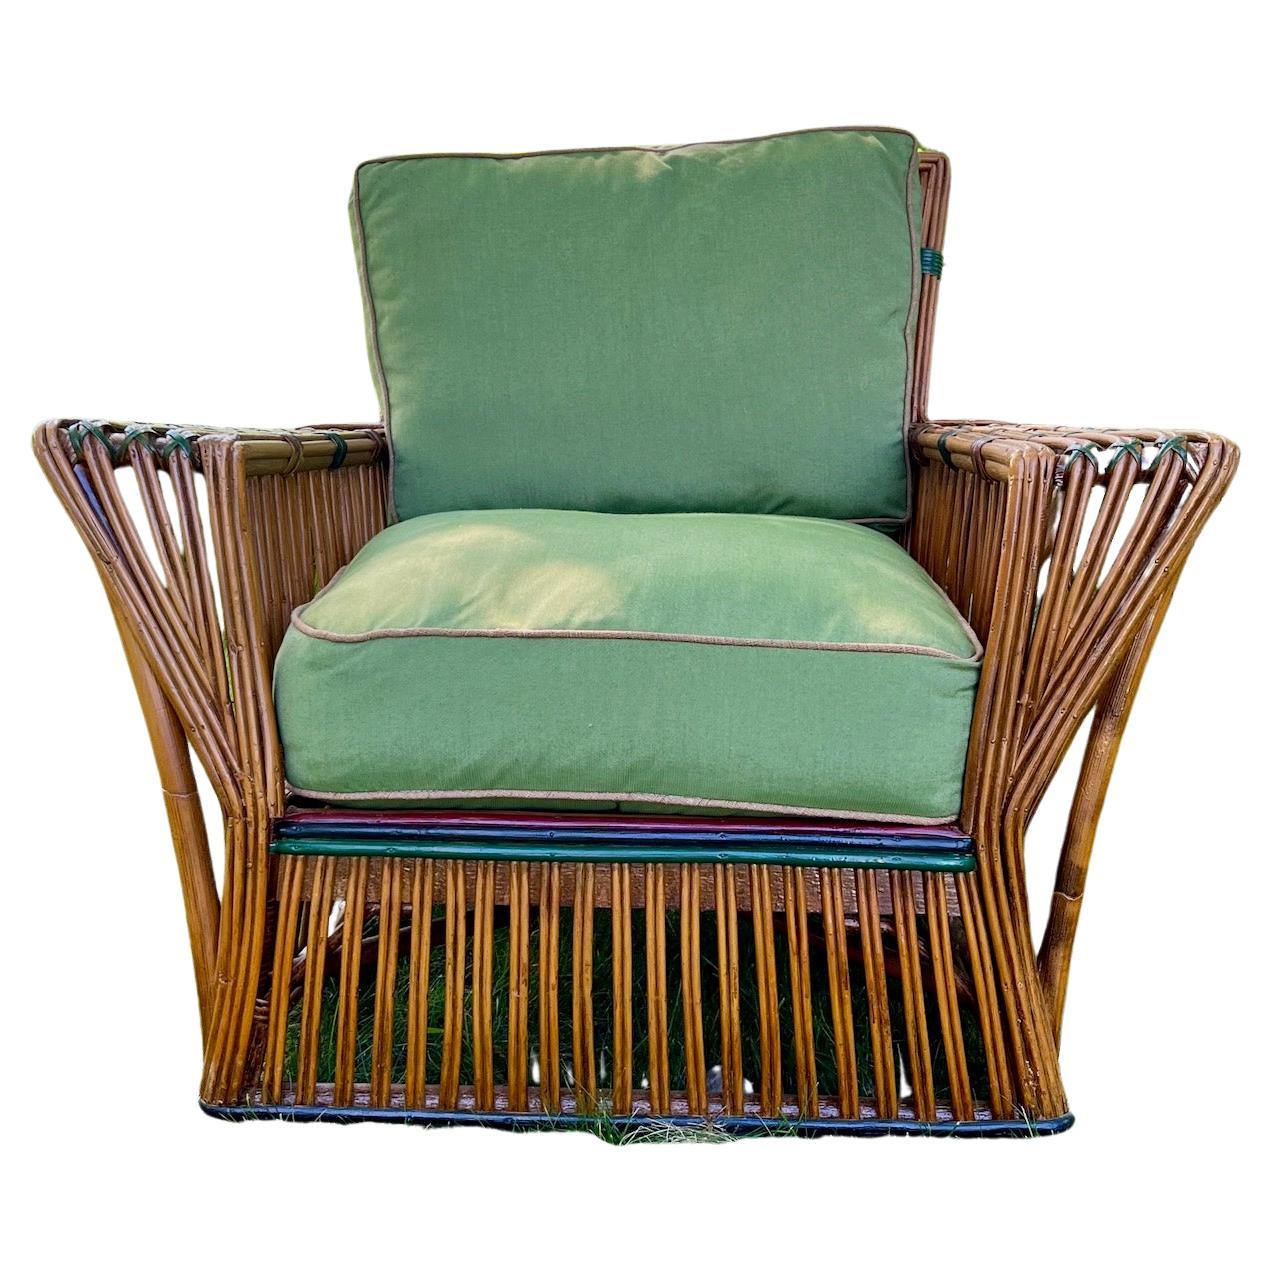 An Antique ,handsome and stylish Rattan Arm Chair in natural finish with colored trim, American,C. 1929. This style of furniture was also often called stick wicker or split reed. Modernist stick wicker was all the rage at this point, consumers